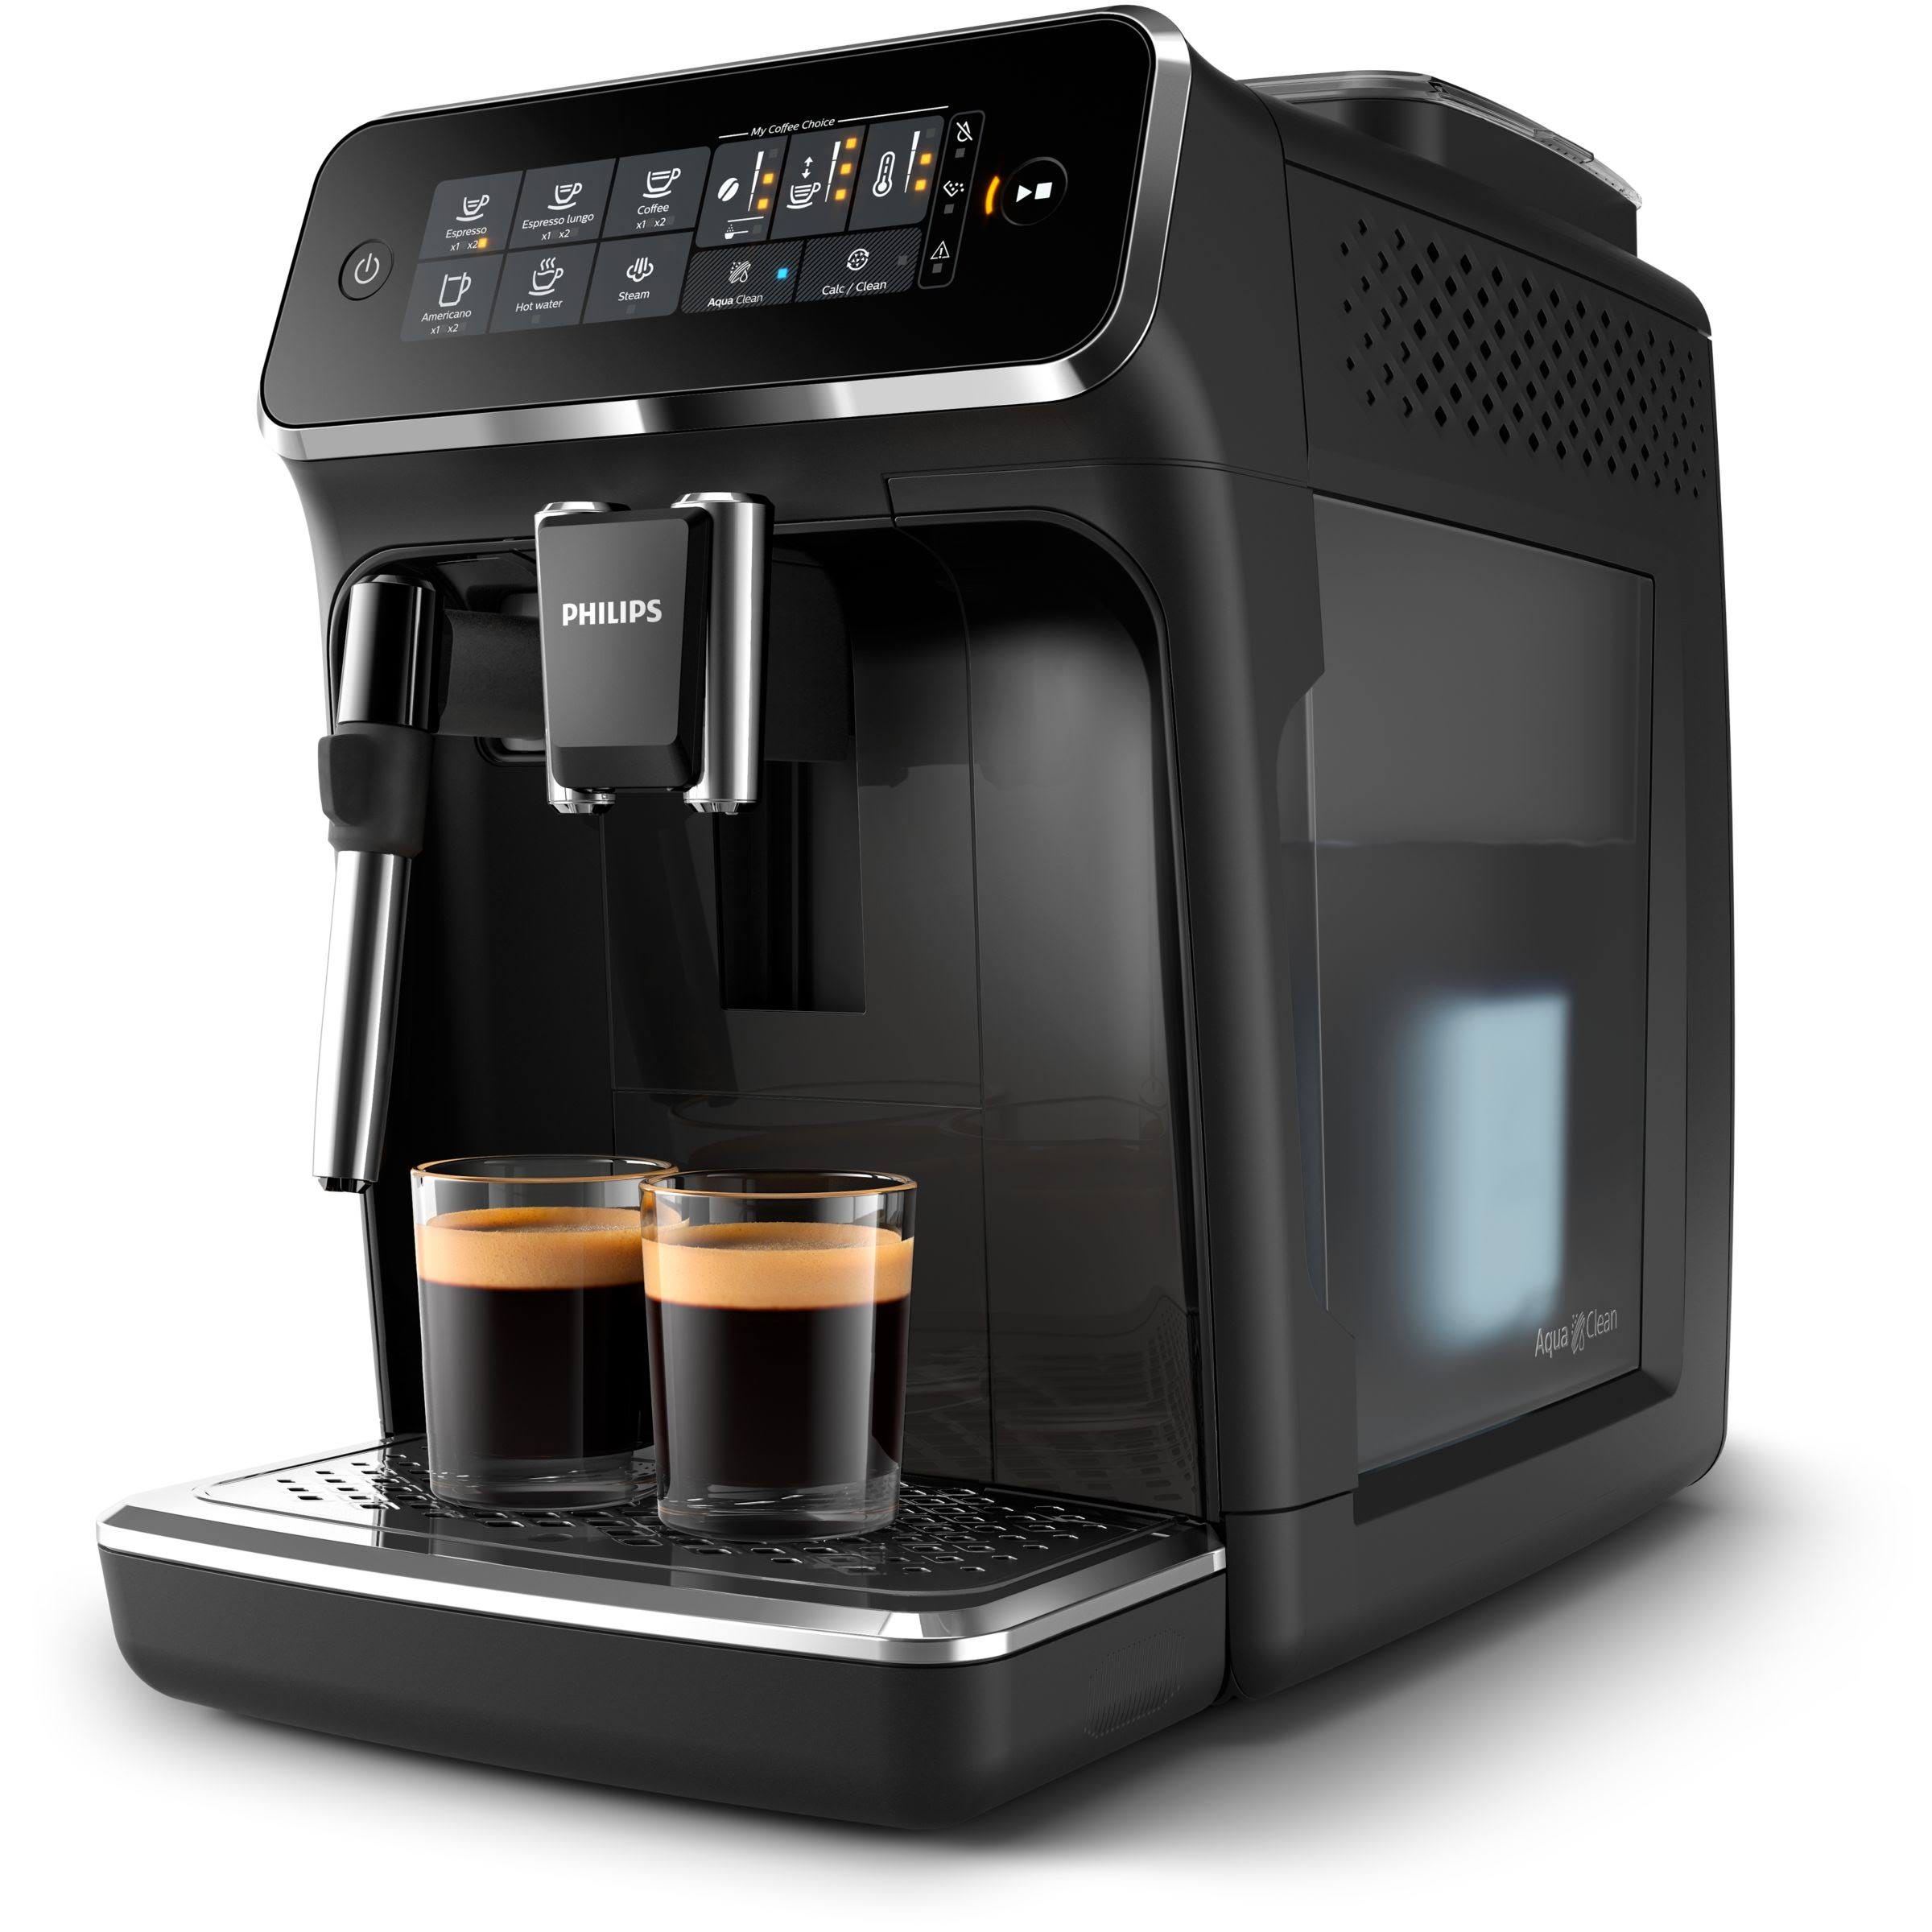 Philips 3200 Fully Automatic Espresso Machine: Ideal Coffee Experience | Image